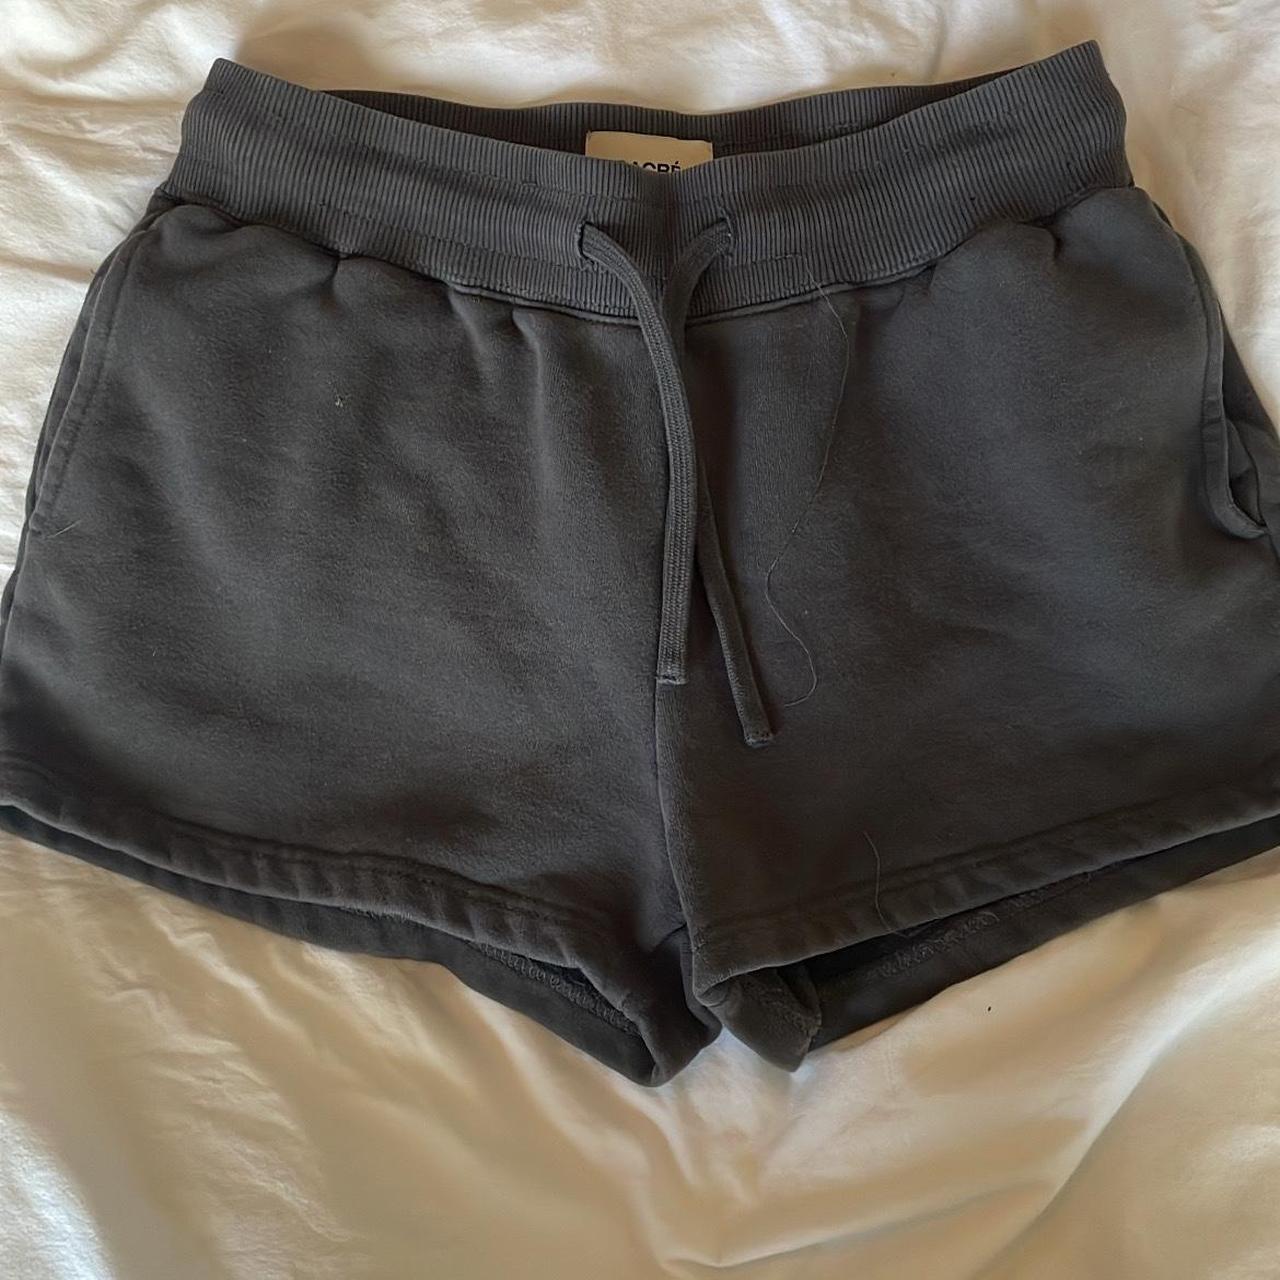 Hind Hydra Women's Athletic Running Shorts Lined - Depop